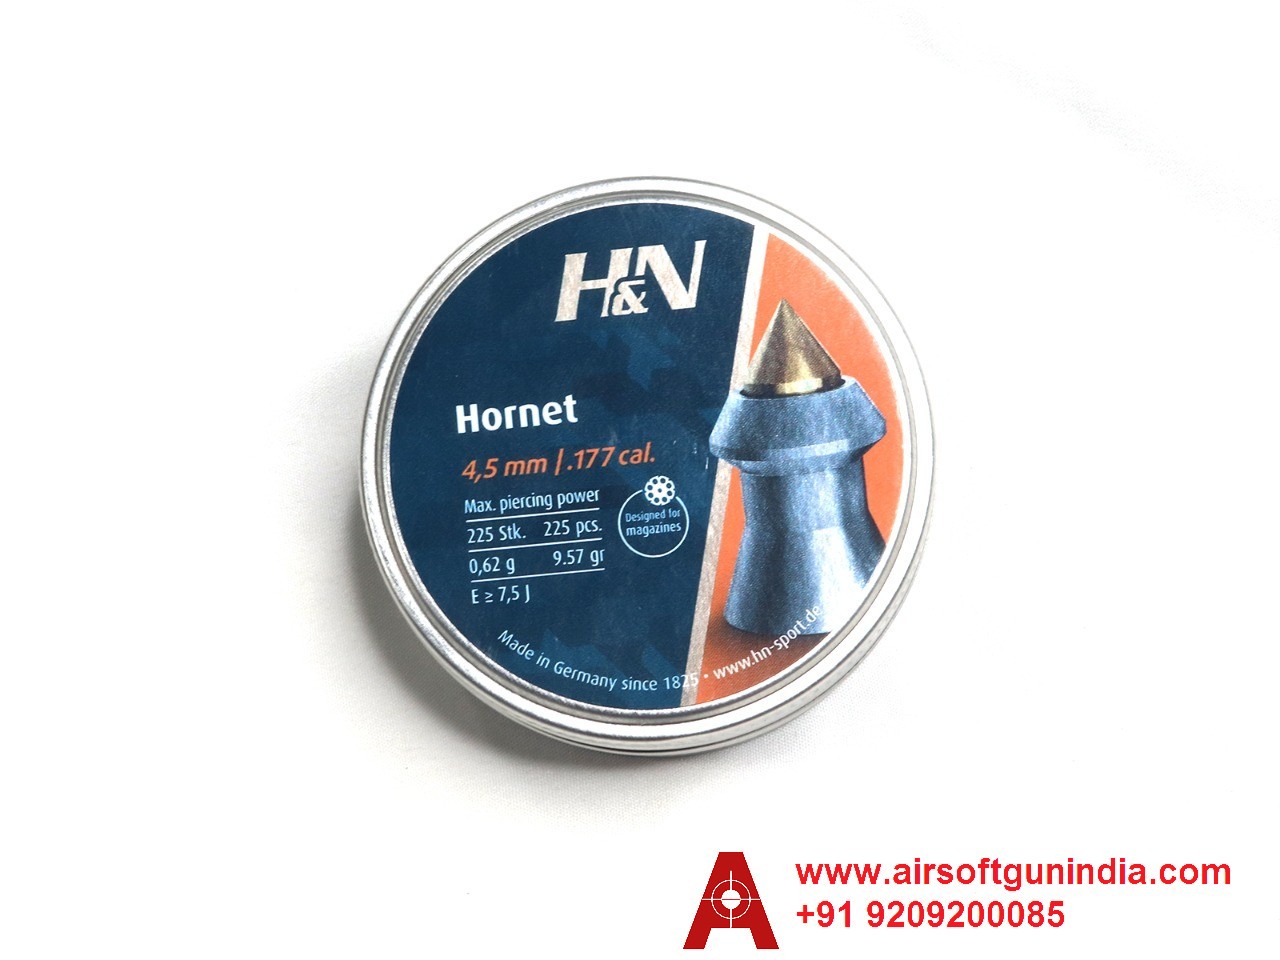 H&N Hornet Pointed Pellets For Rifles By Airsoft Gun India Of 225 Pcs